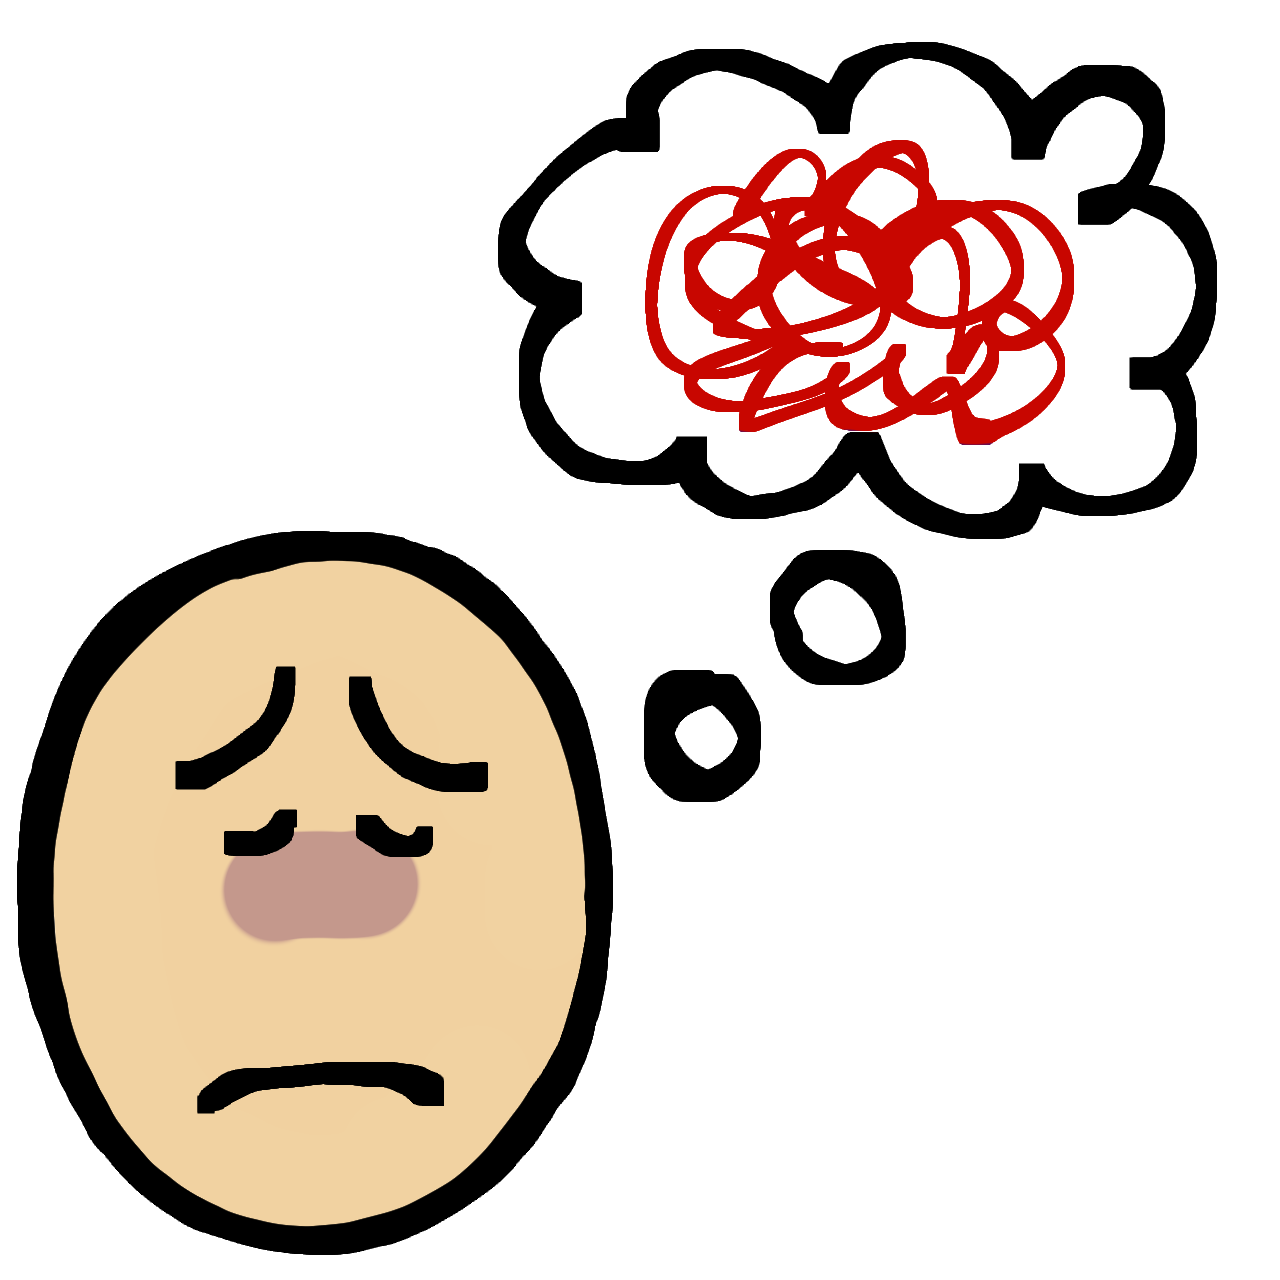 A worried face, eyes closed, with a thought bubble filled with overlapping red swirls.